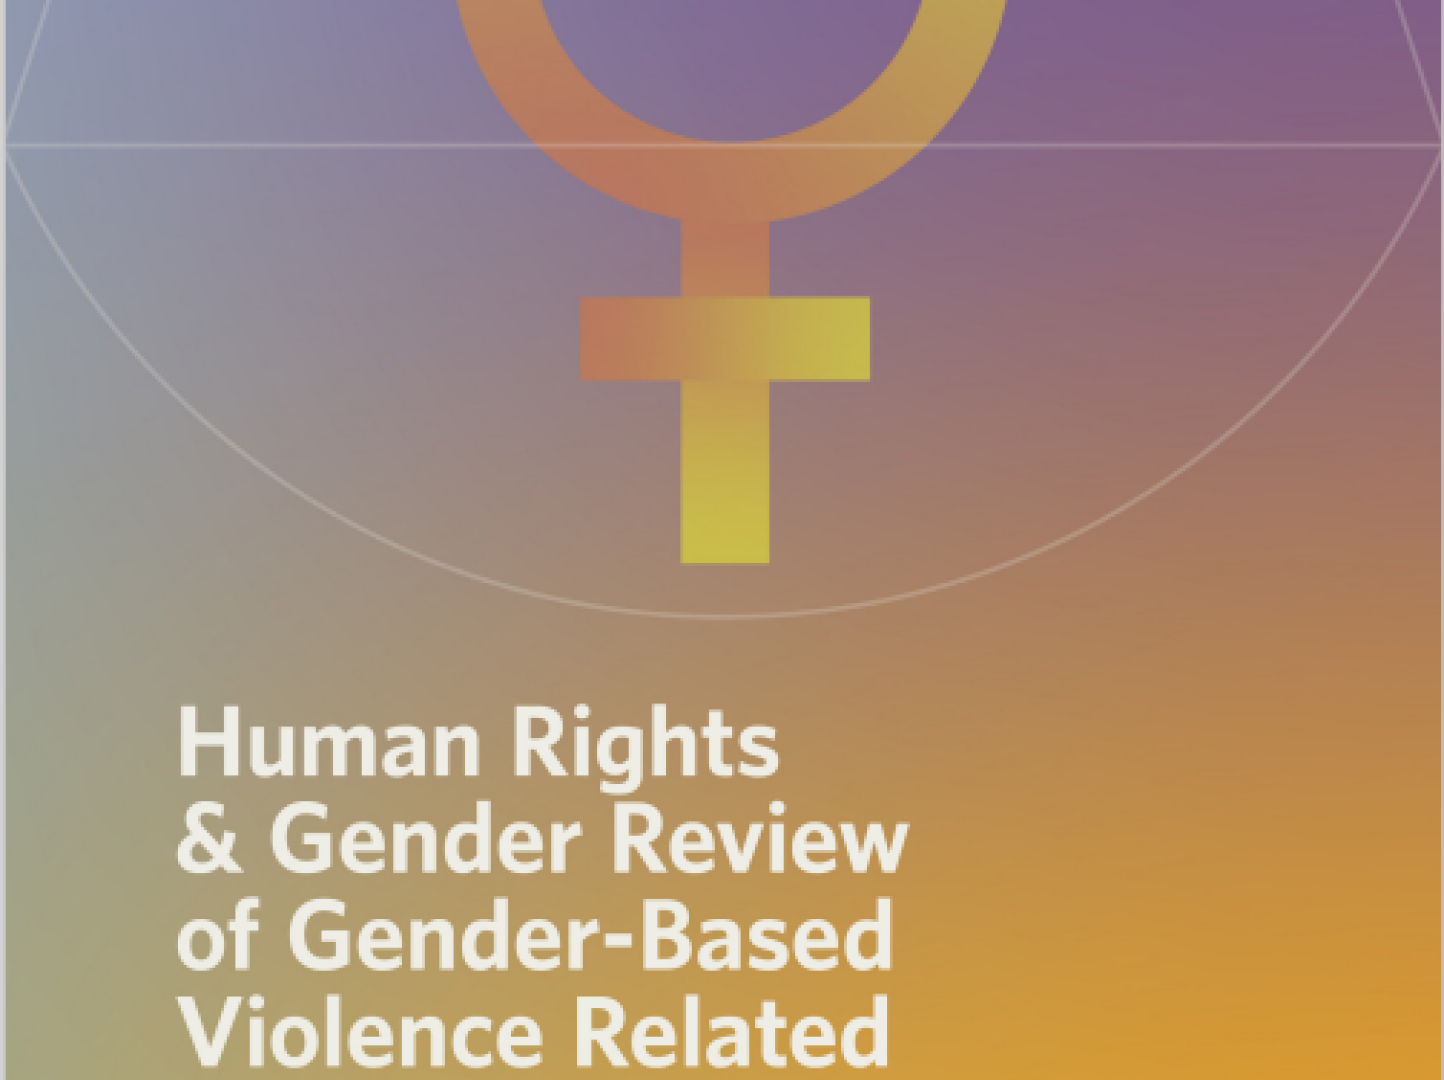 Human Rights & Gender Review of Gender-Based Violence Related Laws in the Maldives